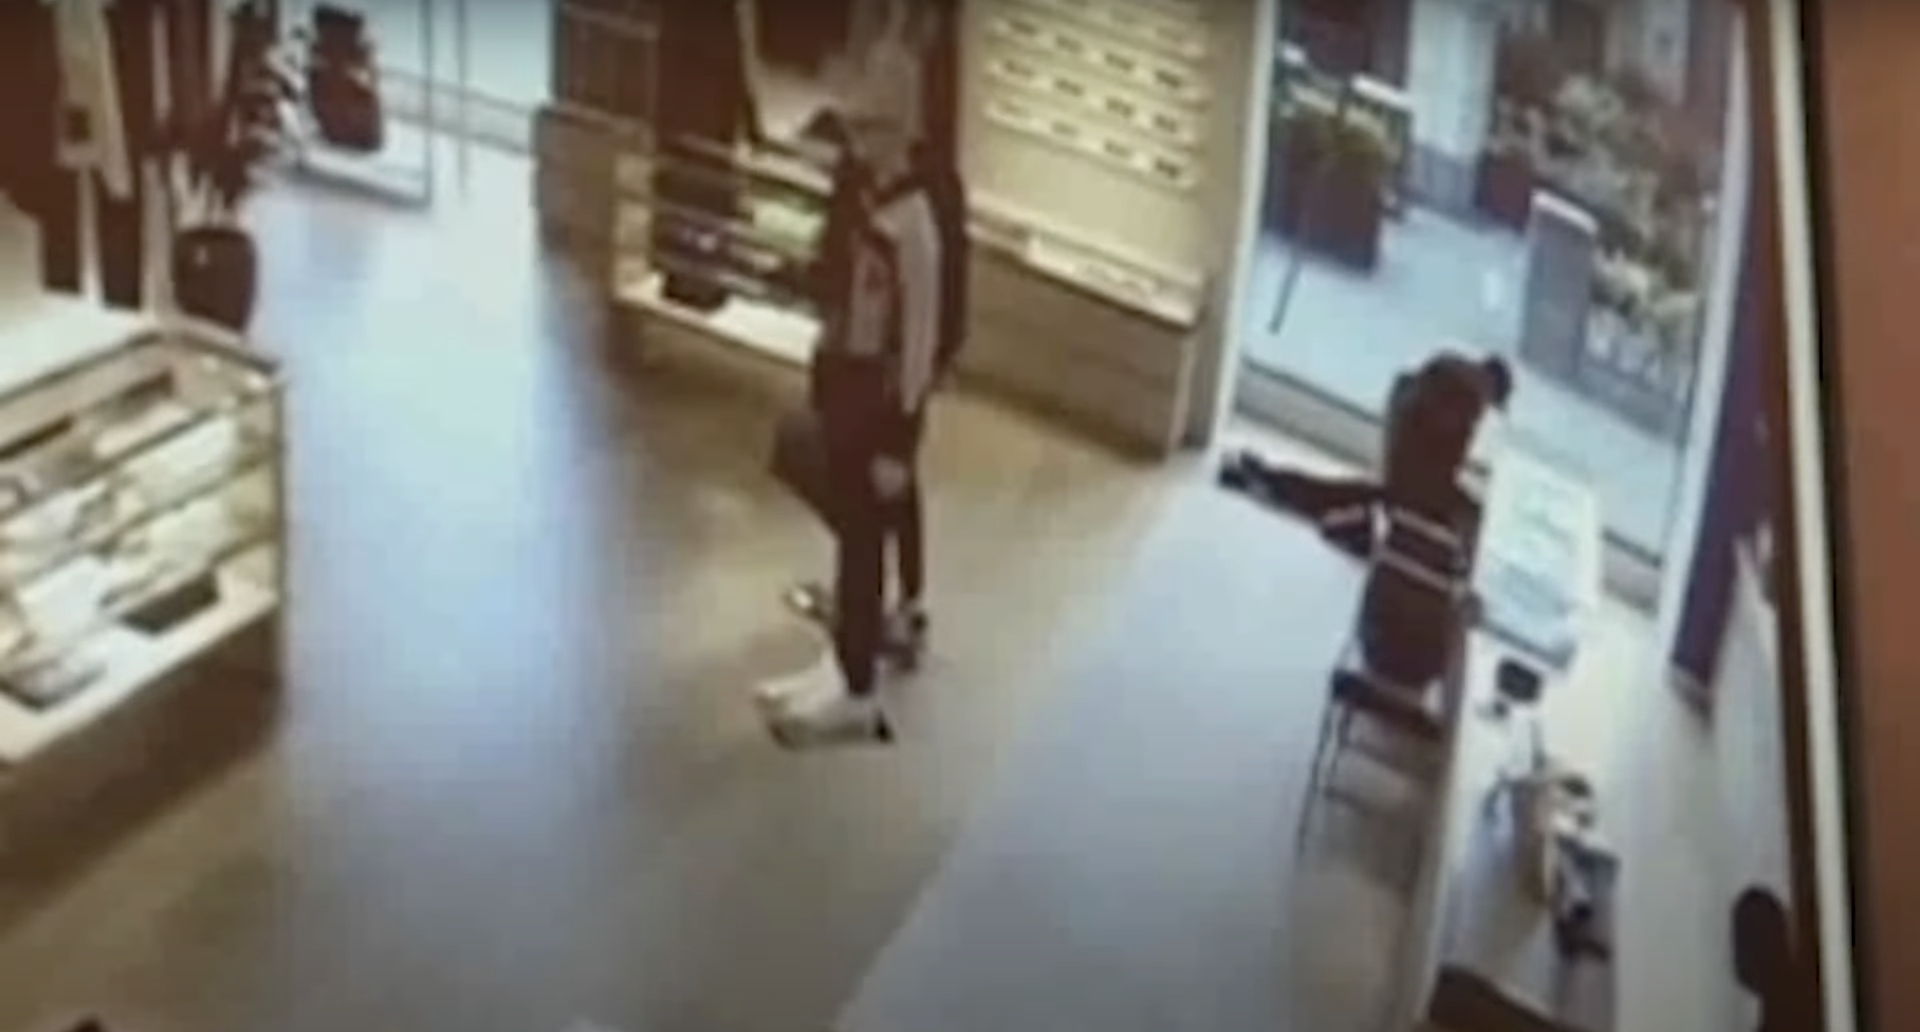 Video: Thieves snatch several Louis Vuitton bags at The